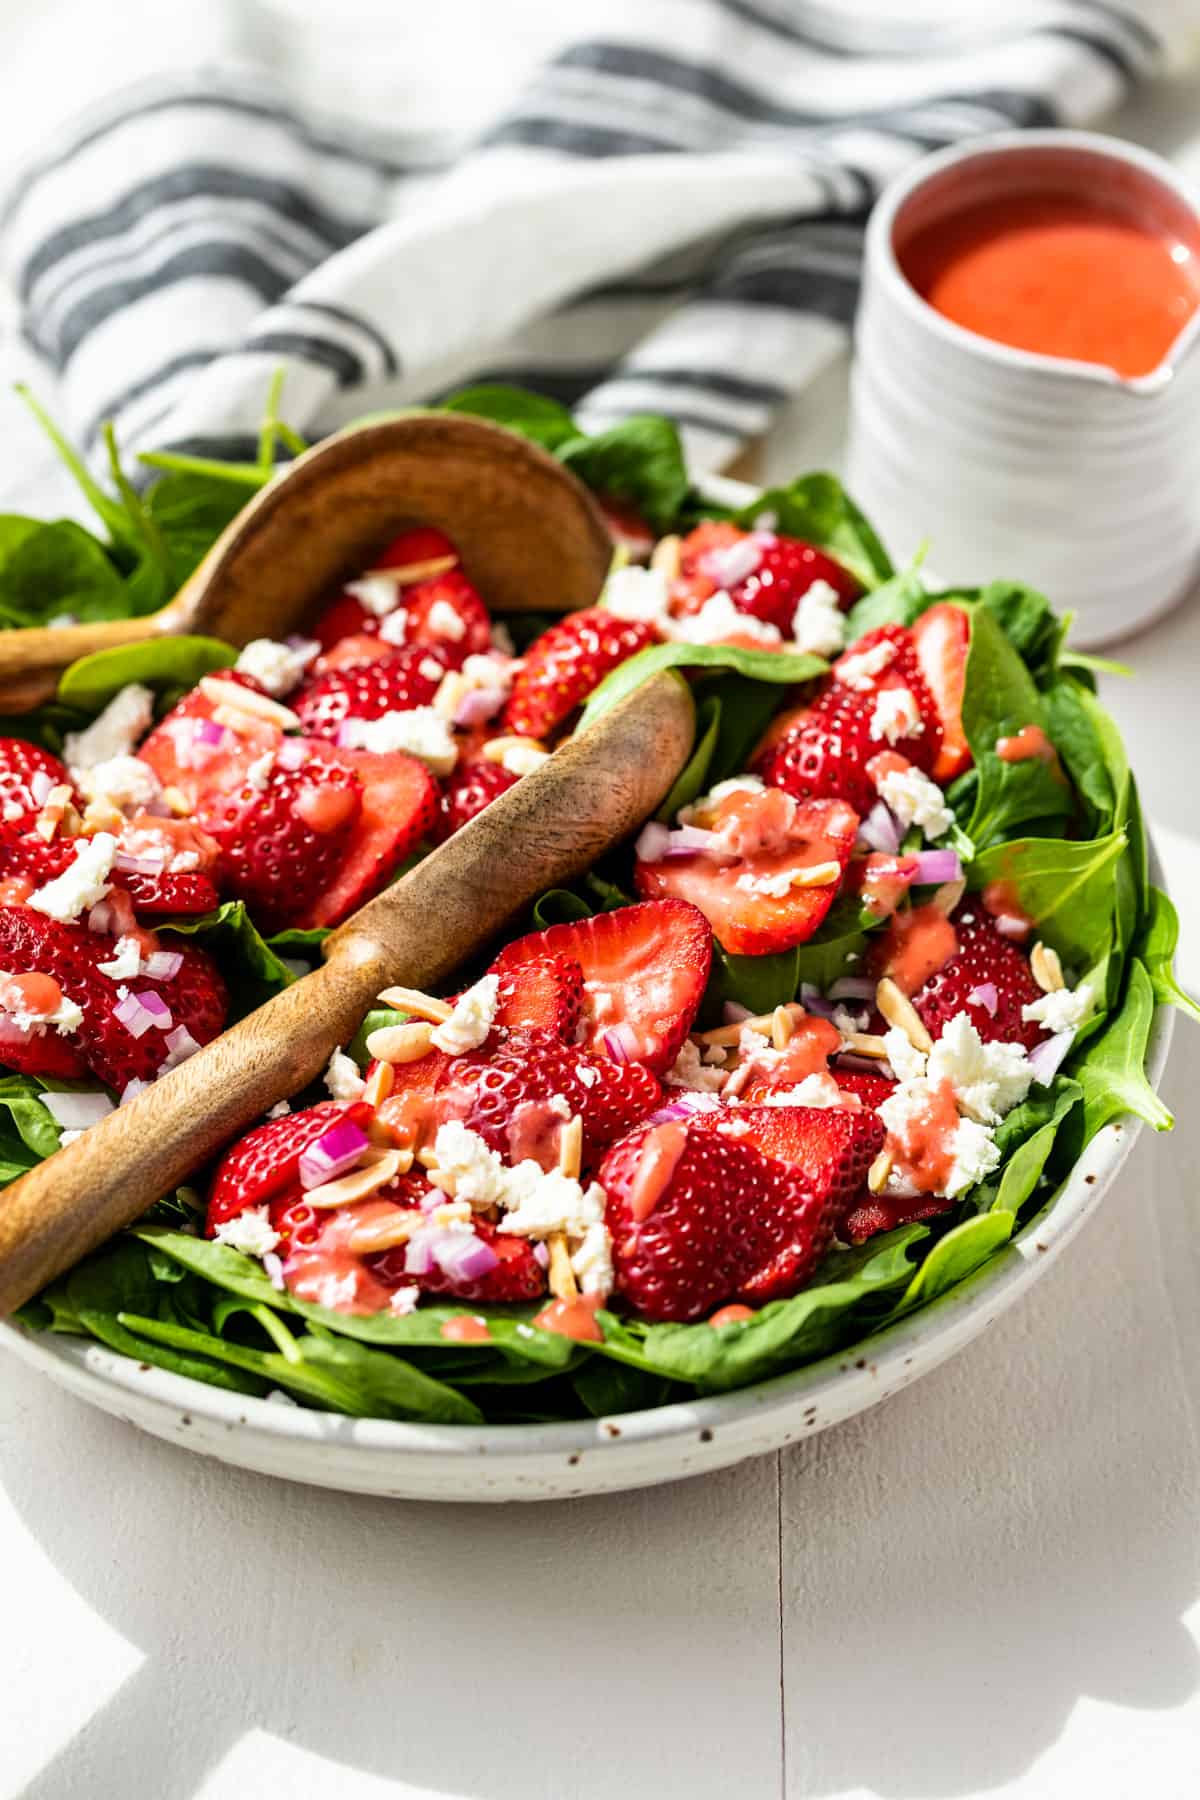 Side view of Strawberry Spinach Salad in a white bowl with a jar of strawberry vinaigrette on the side.